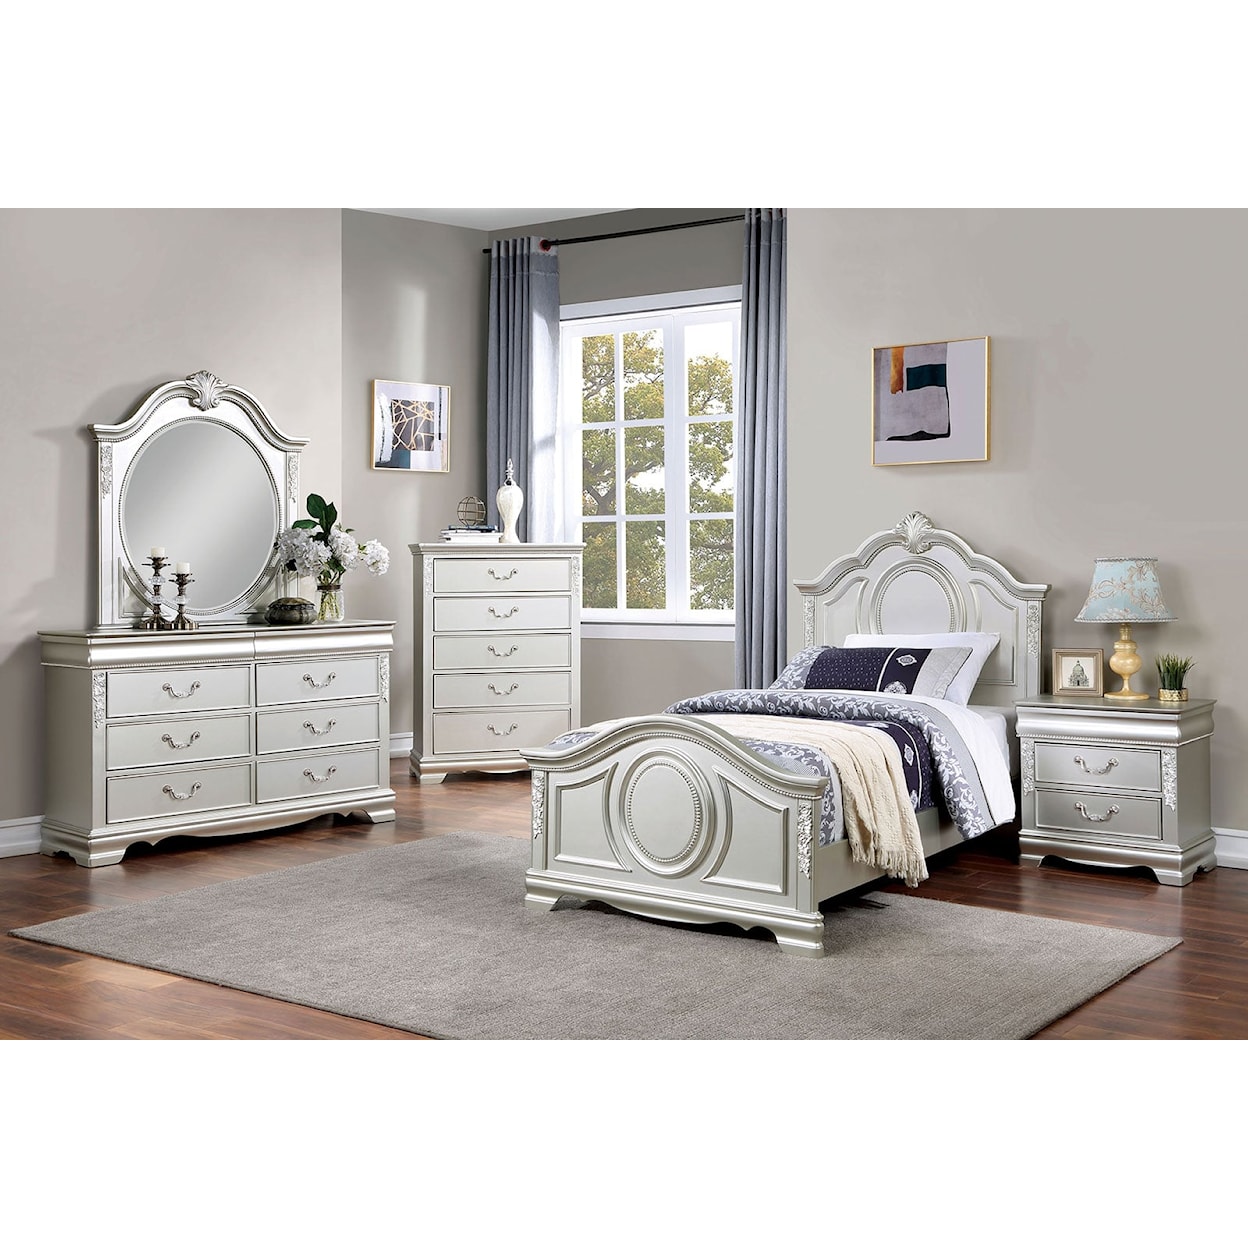 Furniture of America - FOA Alecia 4-Piece Twin Bedroom Set with Wood Details